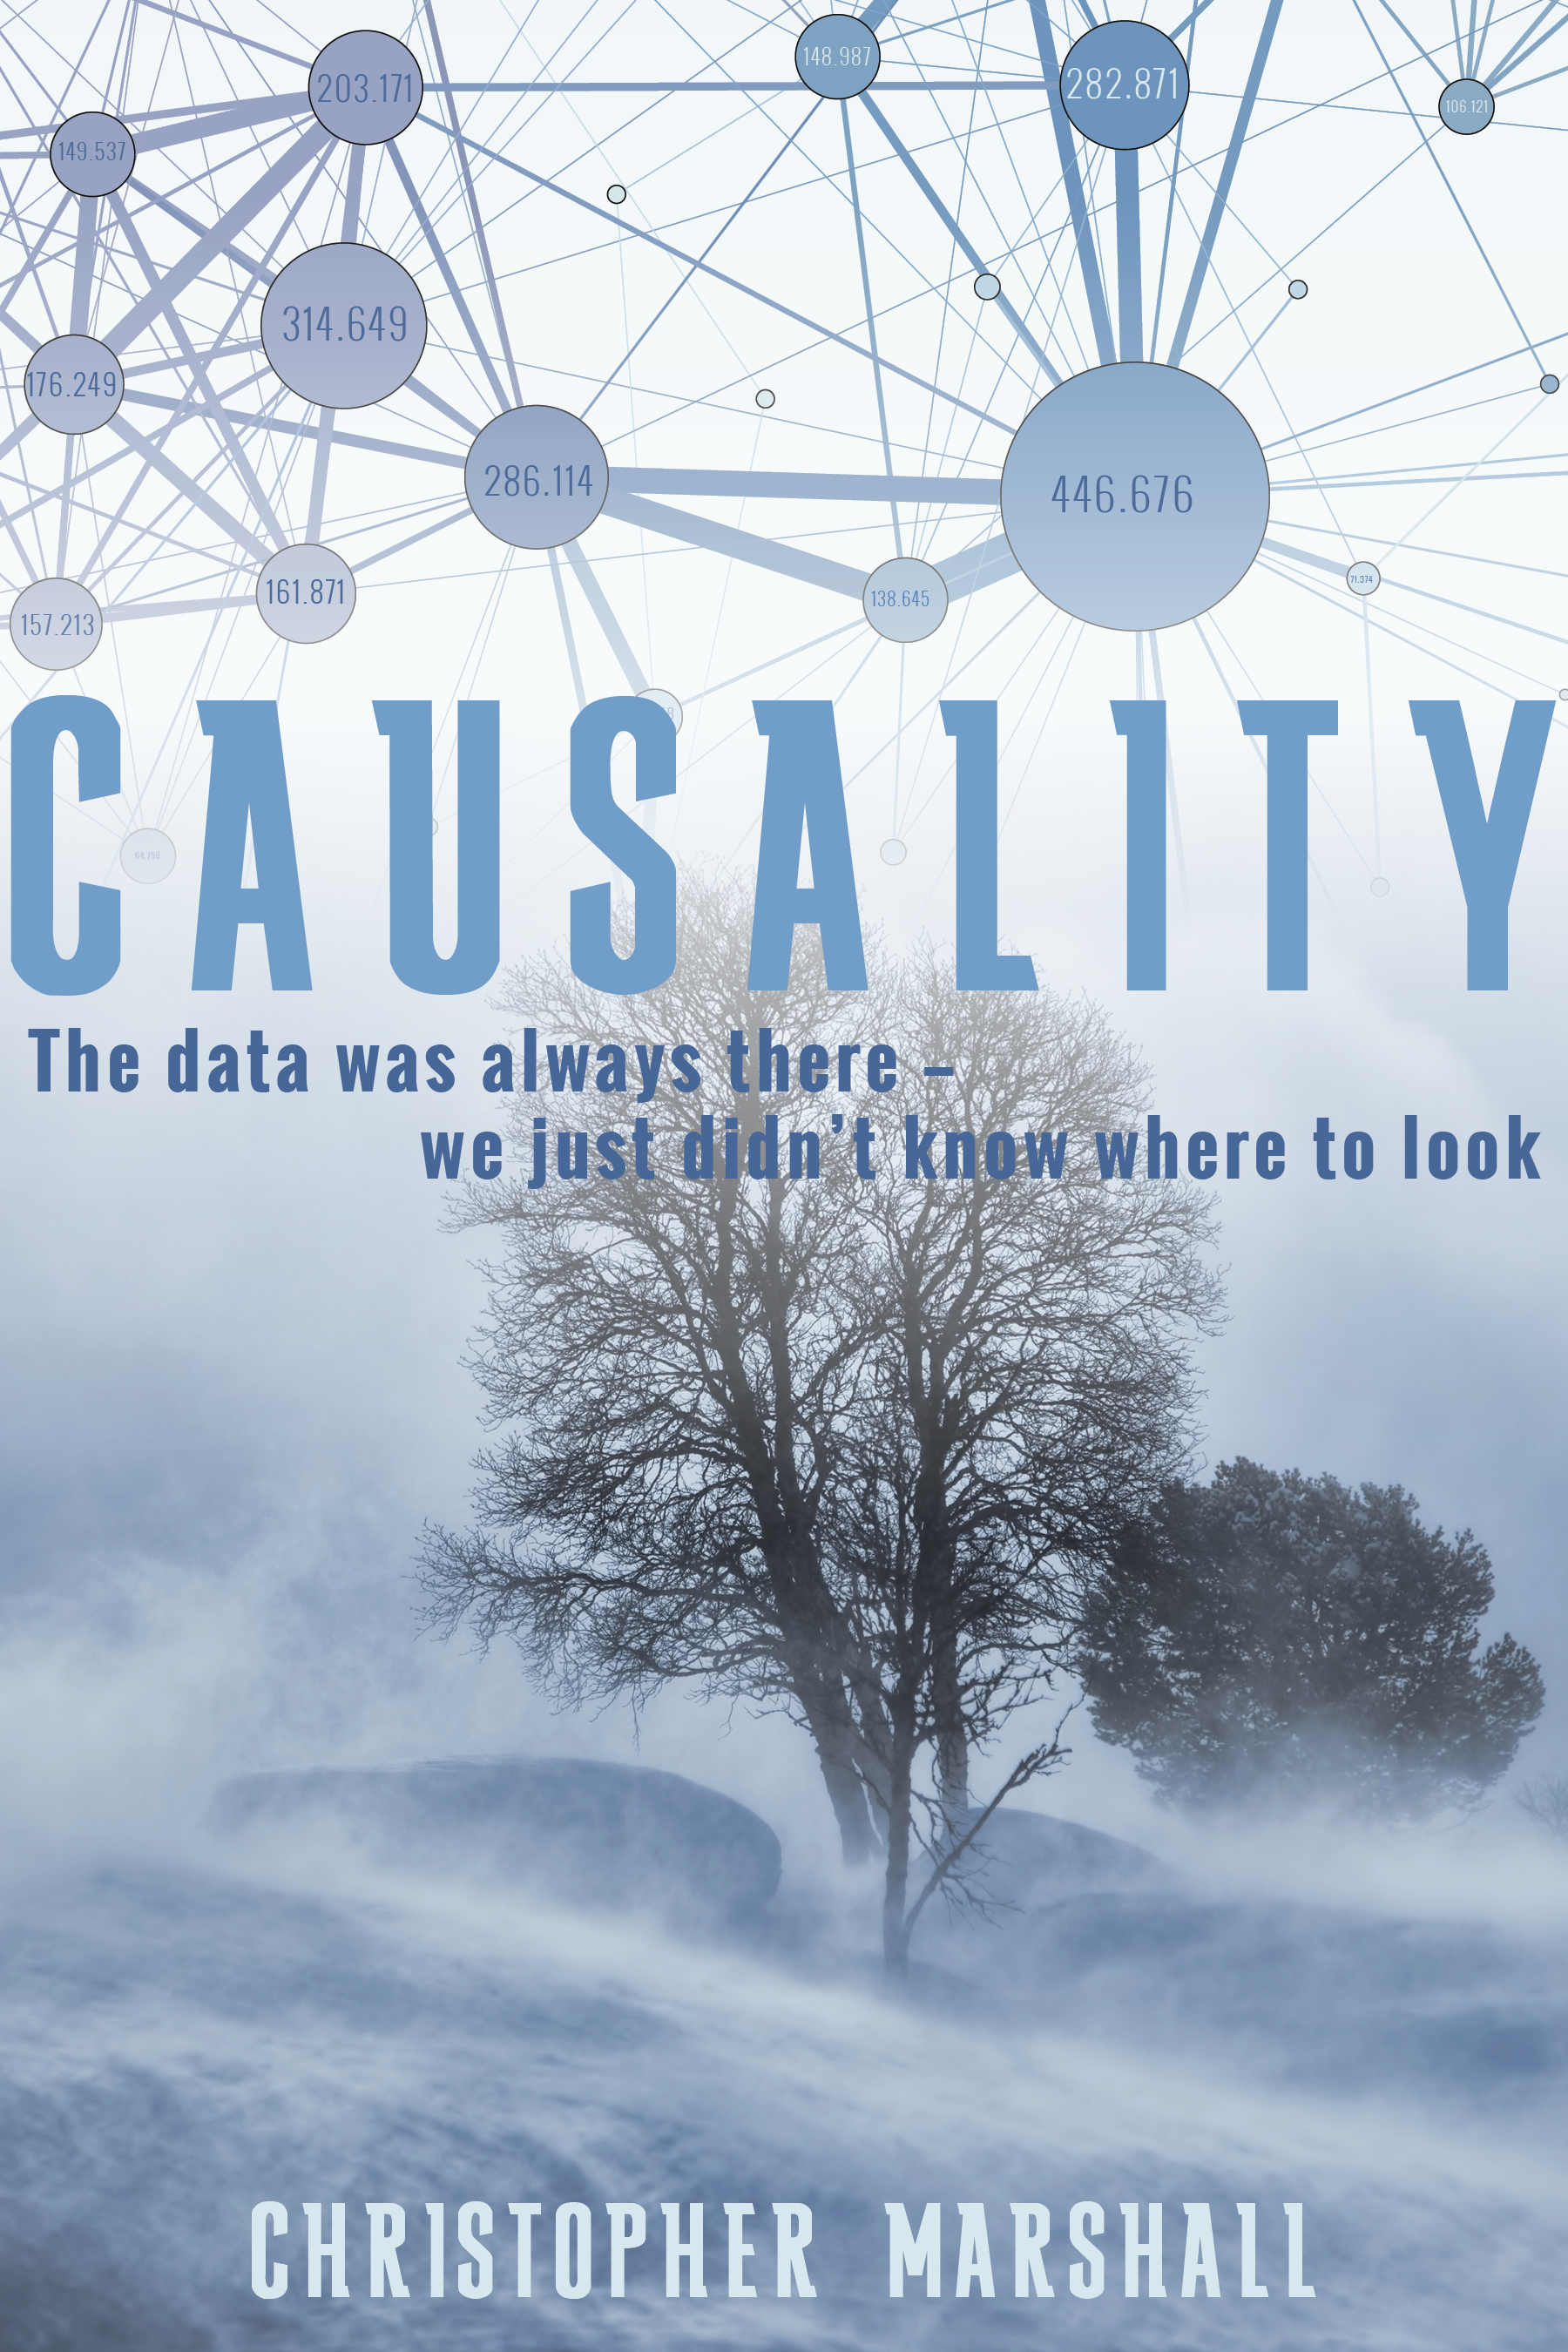 Causality by Christopher Marshall